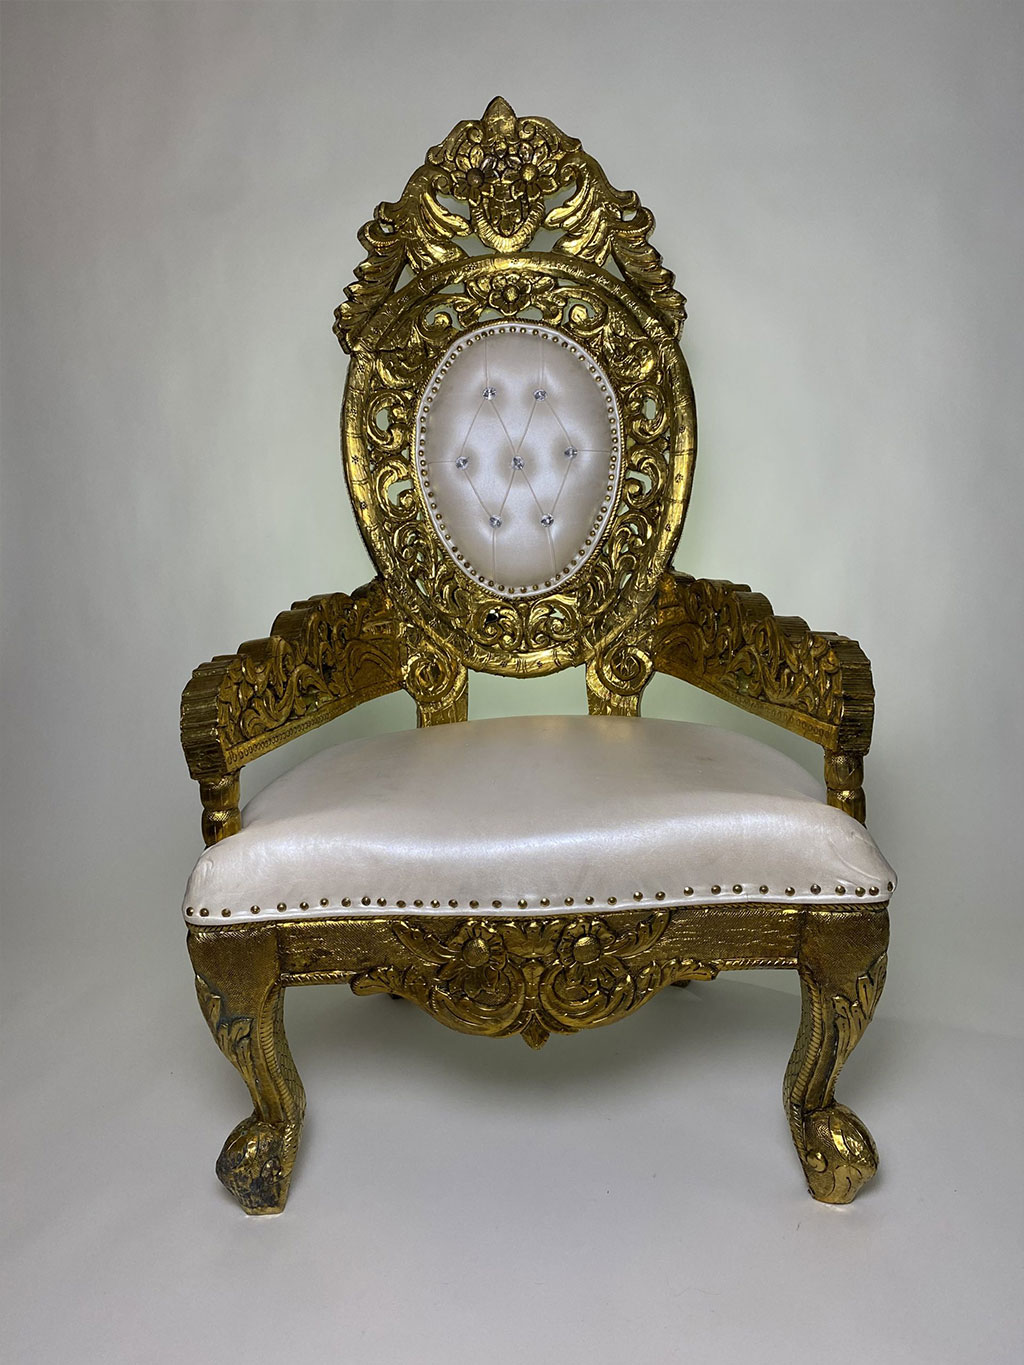 Royal Throne Chair Gold on White